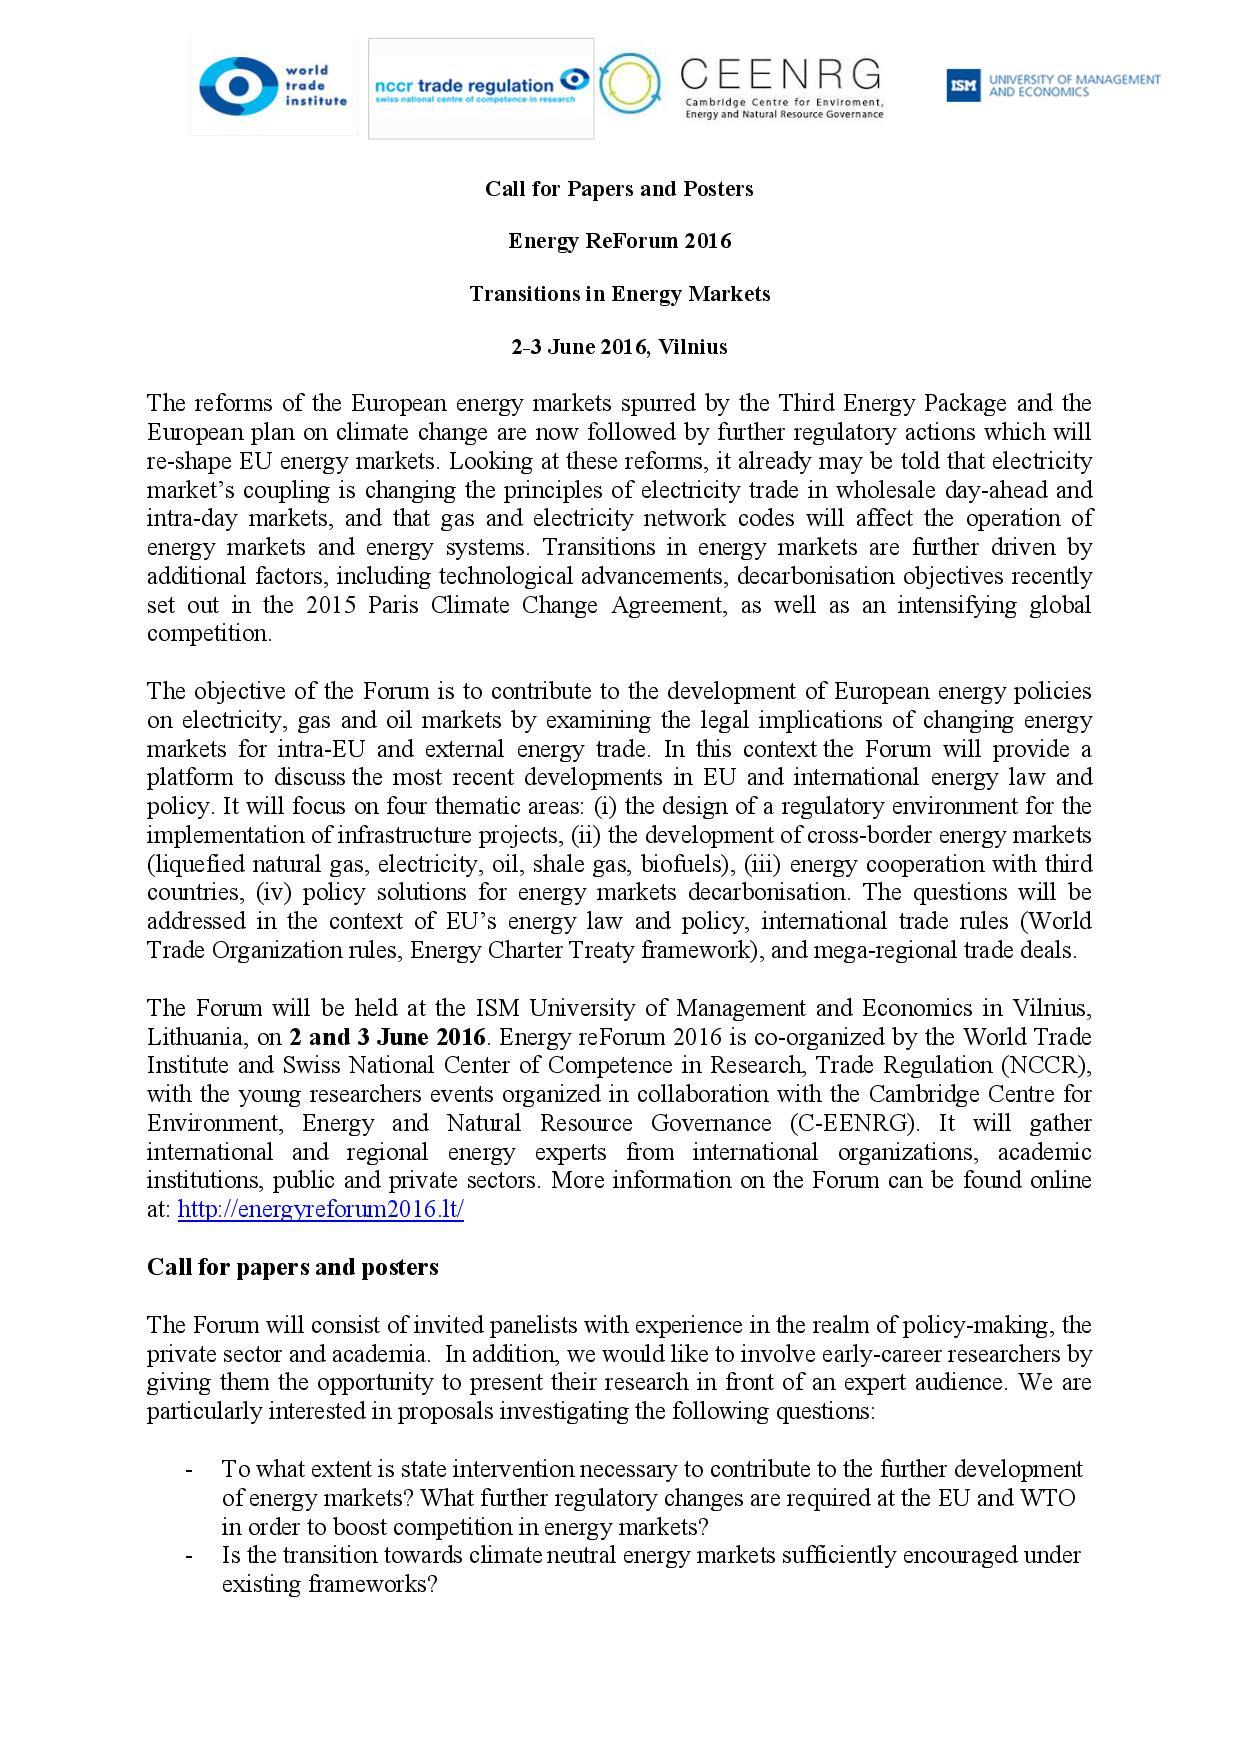 Call for Papers and Posters - Energy ReForum 2016 on Transitions in Energy Markets